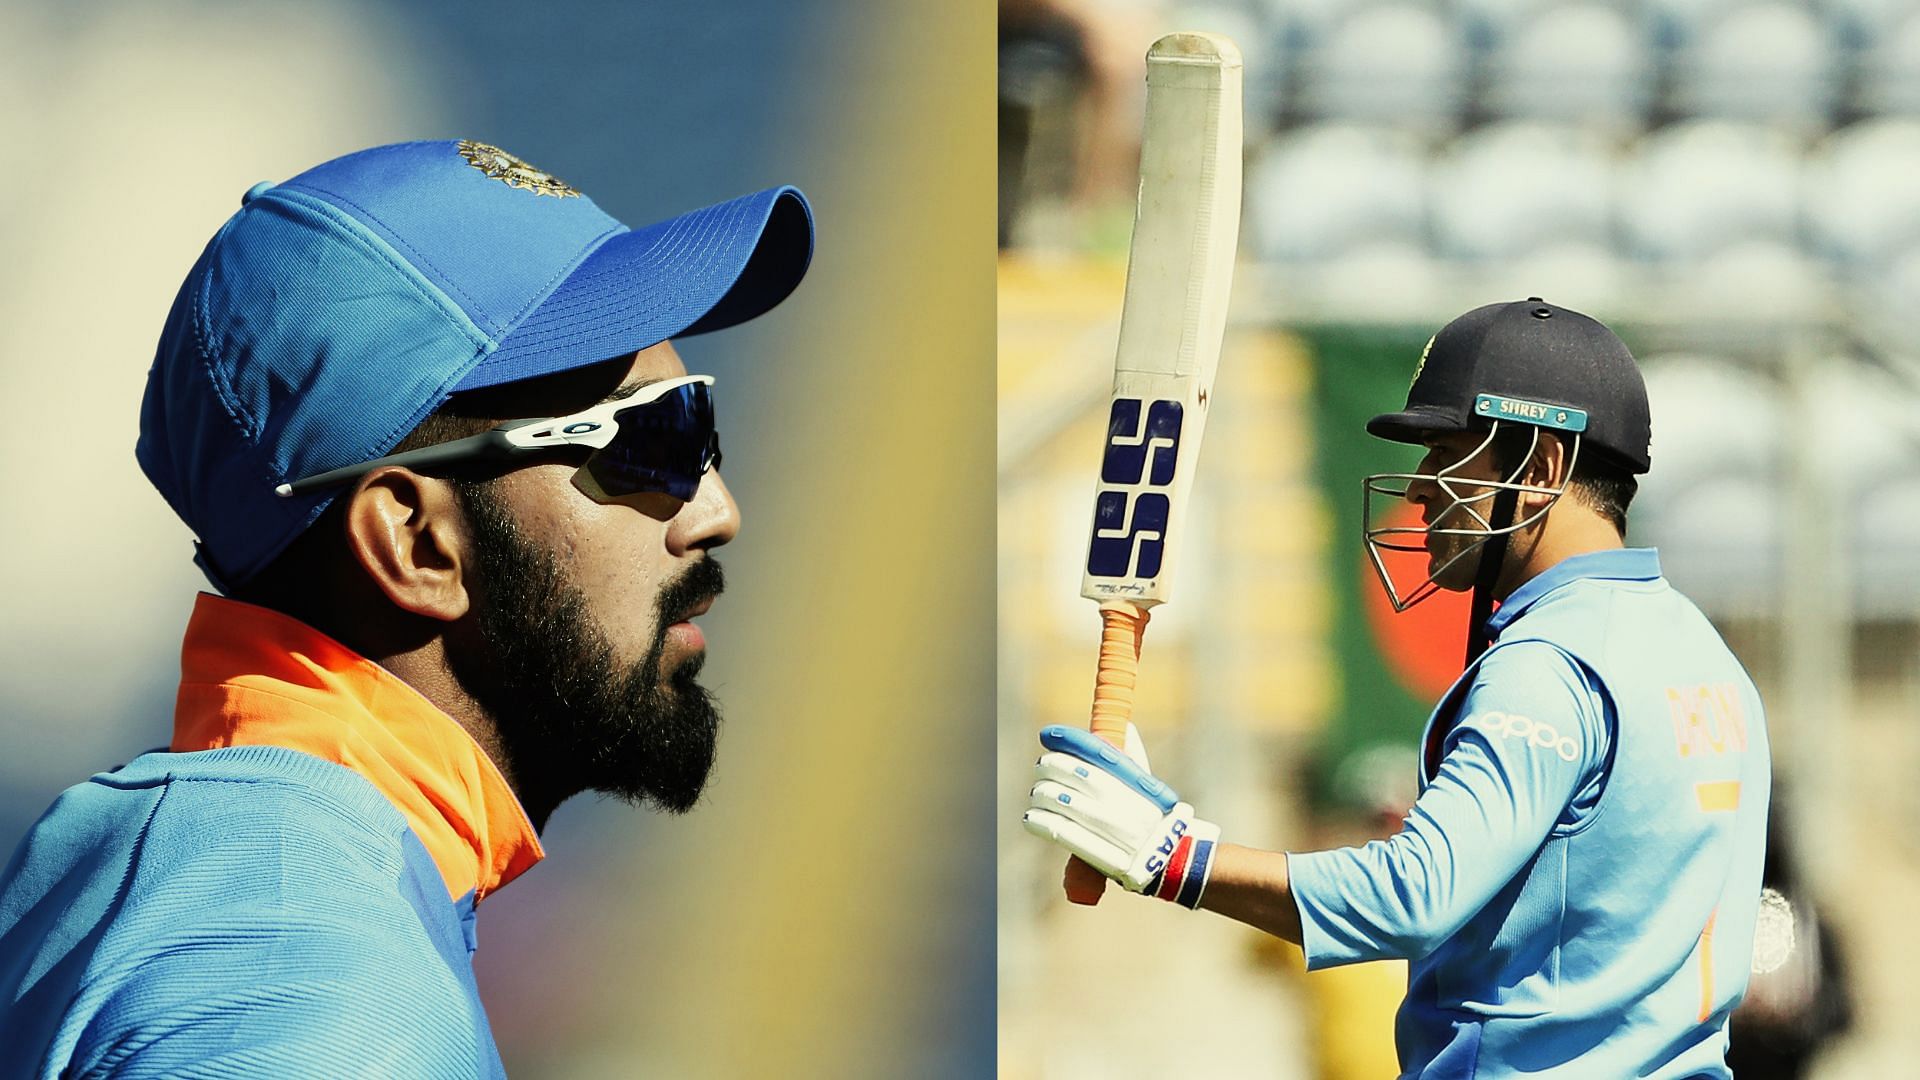 Inspired by the monumental effort of Rahul and Dhoni, India posted a massive total of 359-7 at the end of their innings.